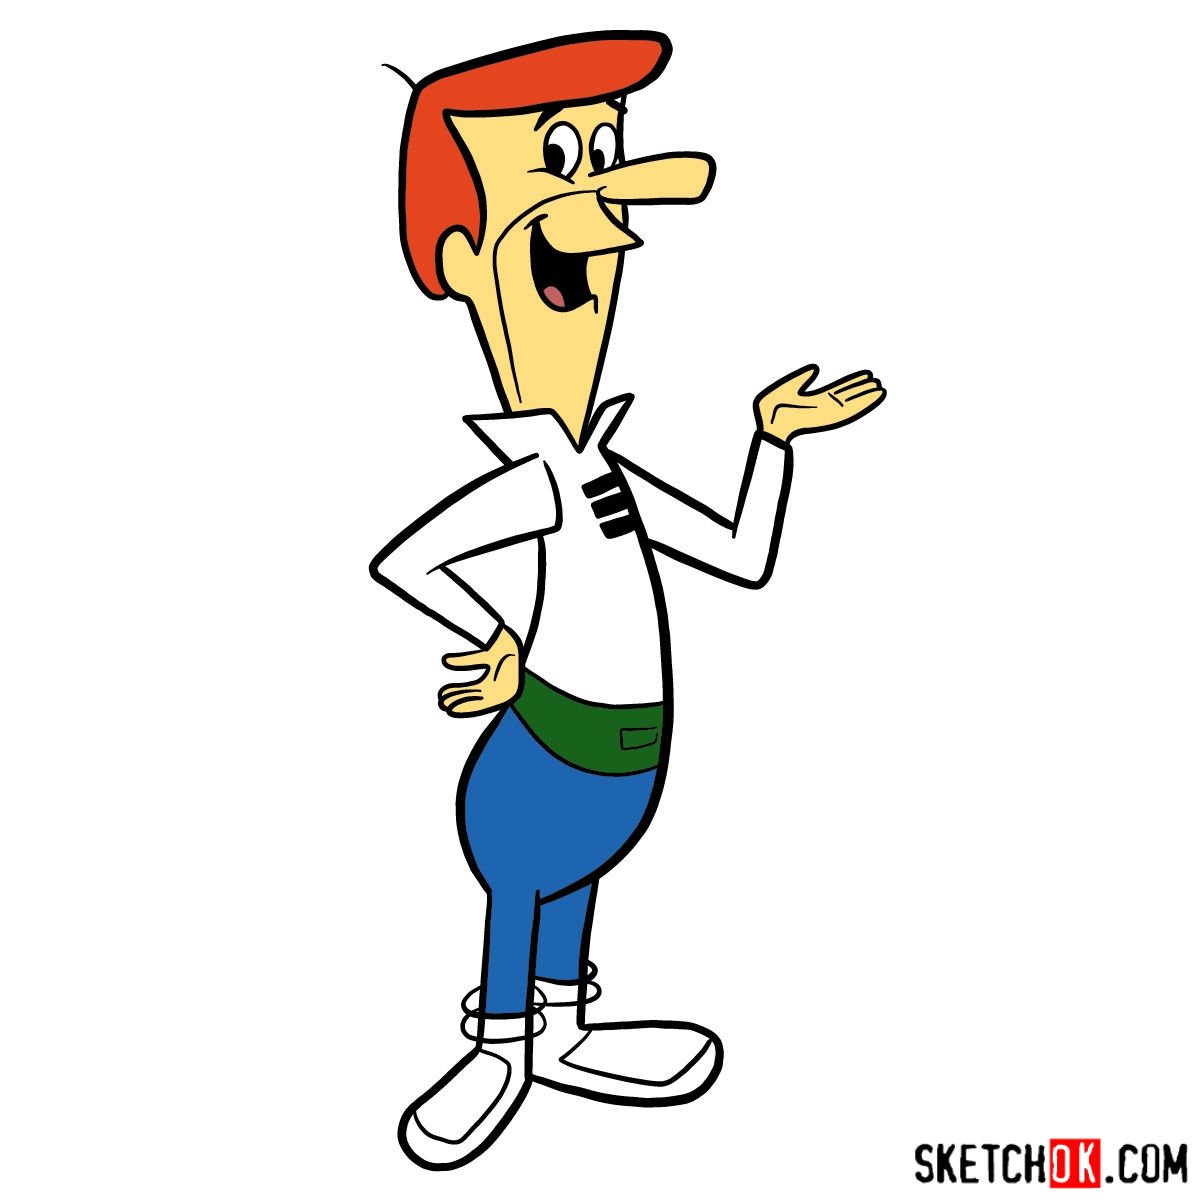 How to draw George Jetson